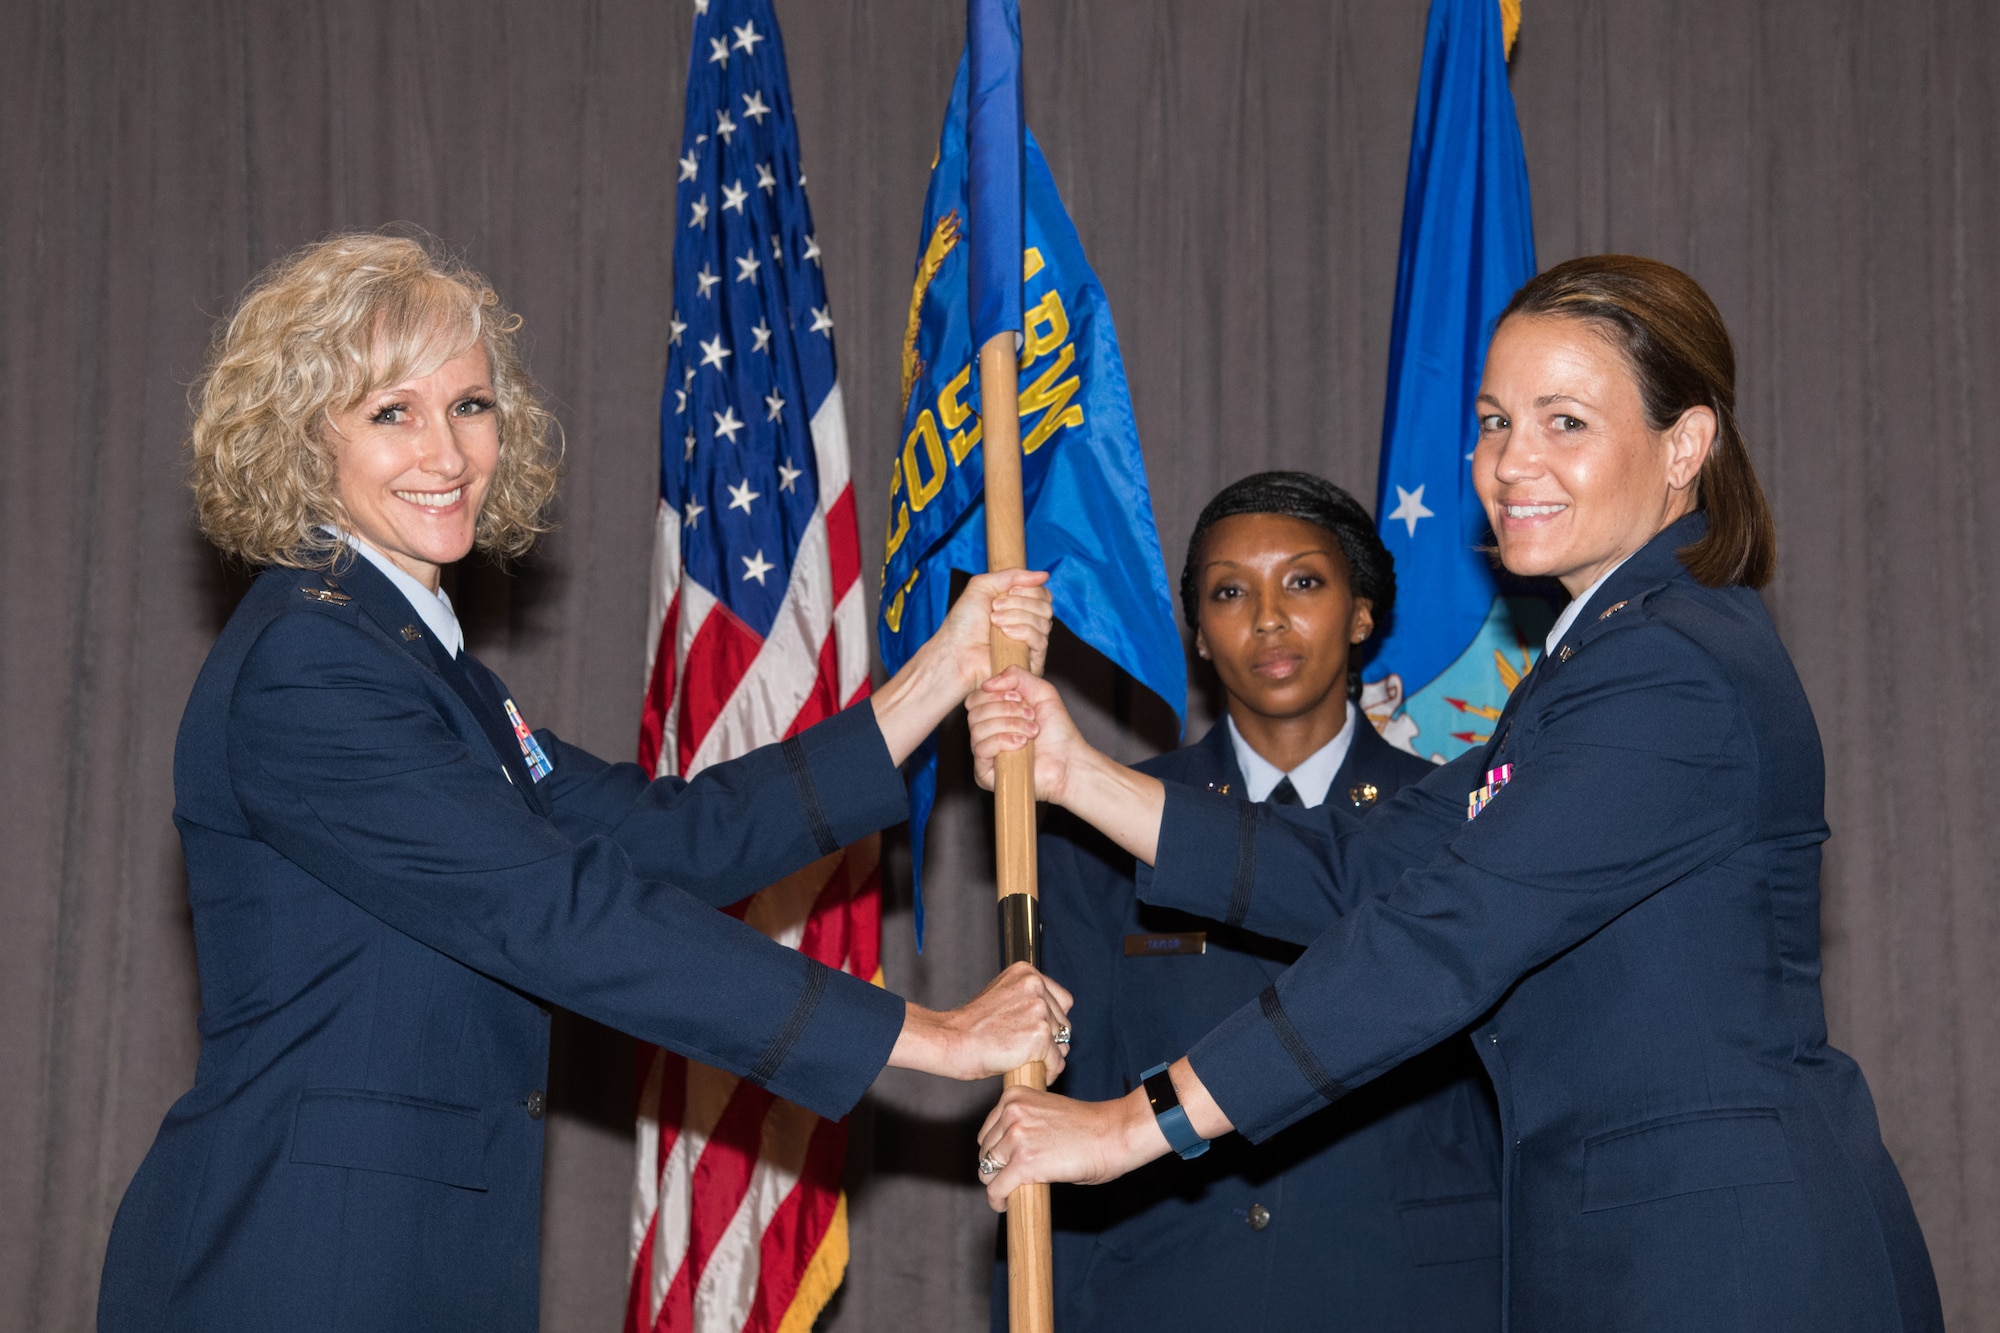 Colonel Jeanette Frantal, 42nd Medical Group commander, hands the unit flag for the 42nd Health Care Operations Squadron to Lt. Col. Melissa Runge, HCOS commander, during a medical group squadrons’ re-designation ceremony Aug. 5, 2019, Maxwell Air Force Base, Alabama. The 42nd Medical Operations Squadron was re-designated the 42nd HCOS, which will focus on military family member, non-active duty and retiree health care, as part of Defense Department reforms to the Military Health System. (U.S. Air Force photo by William Birchfield)